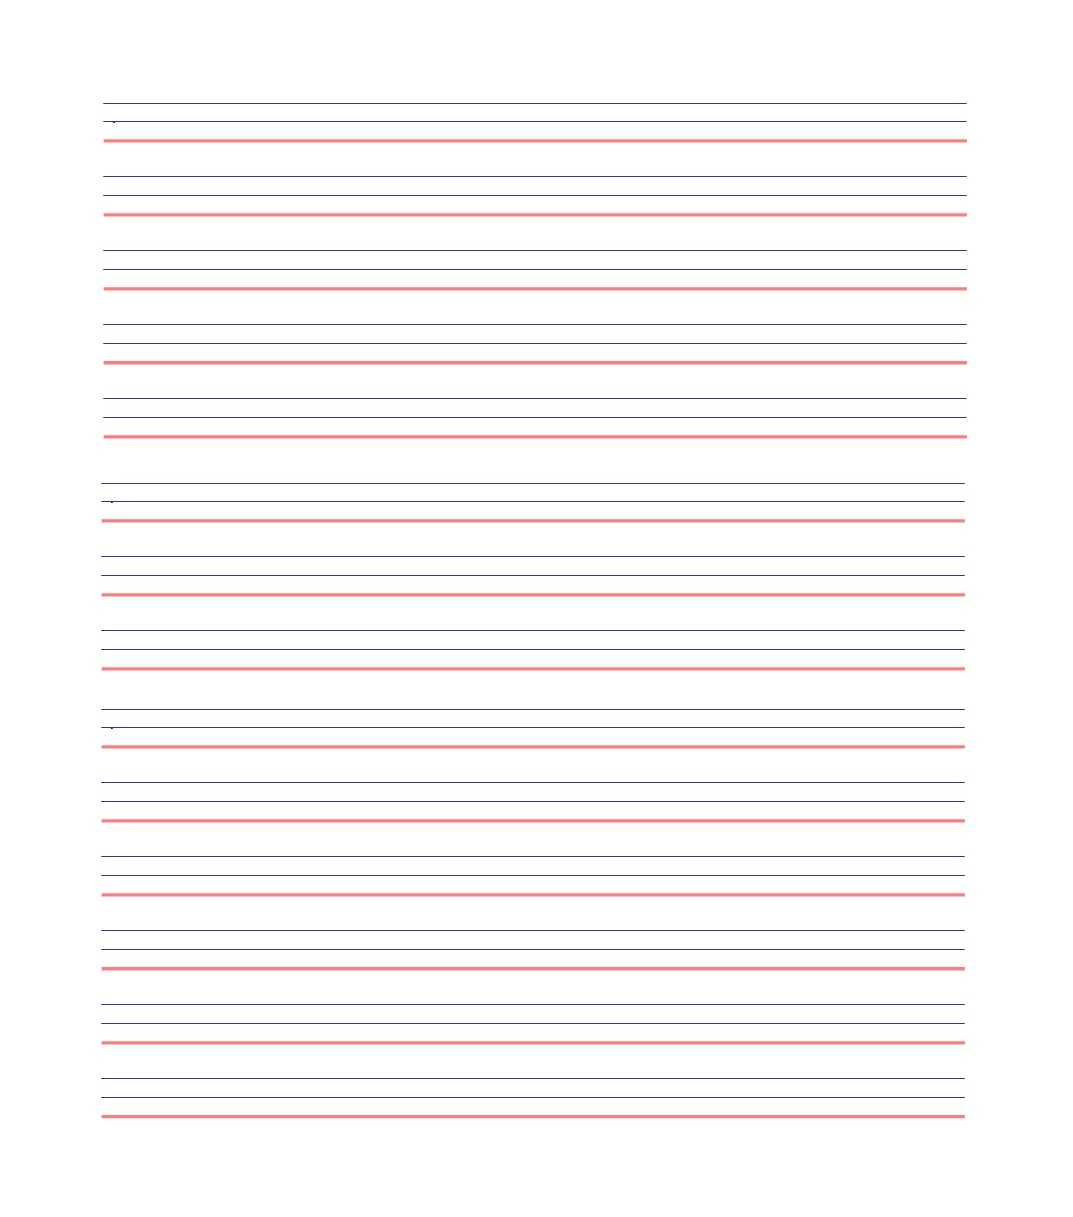 Microsoft Word Notebook Paper Template – Tomope.zaribanks.co For Notebook Paper Template For Word 2010